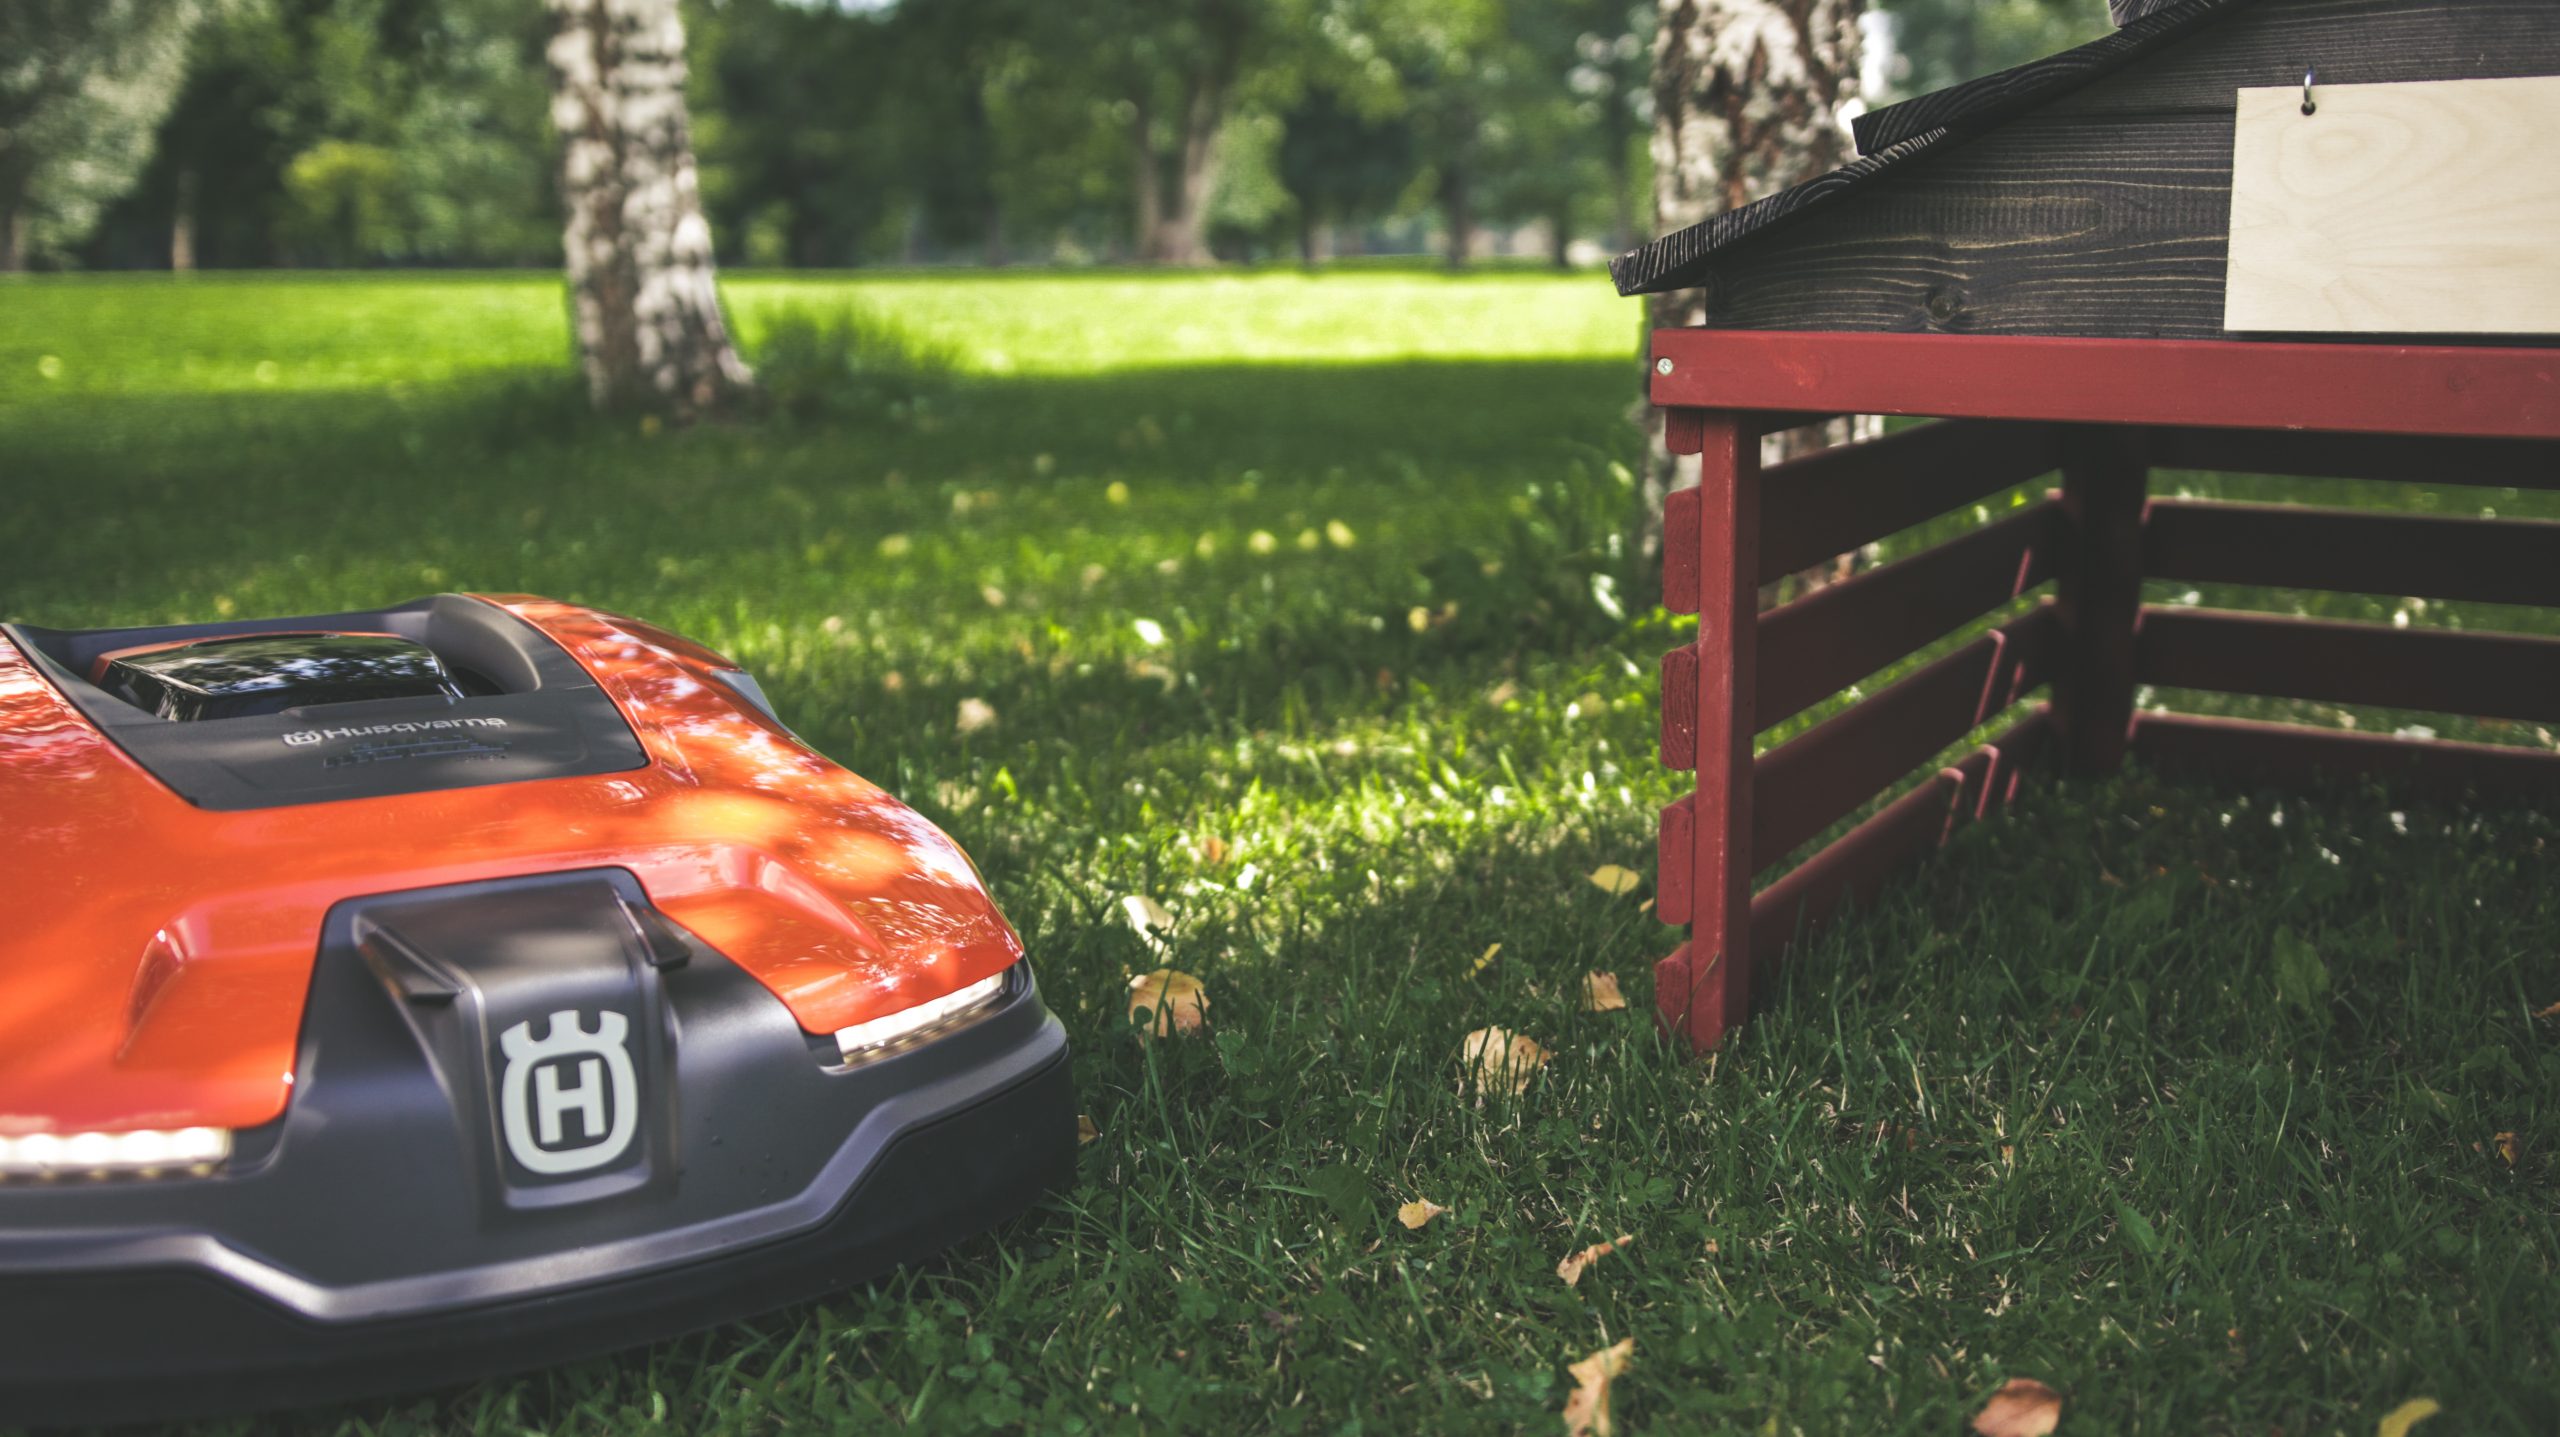 With a Robot Mower, Taking Care of Your Lawn is Easy